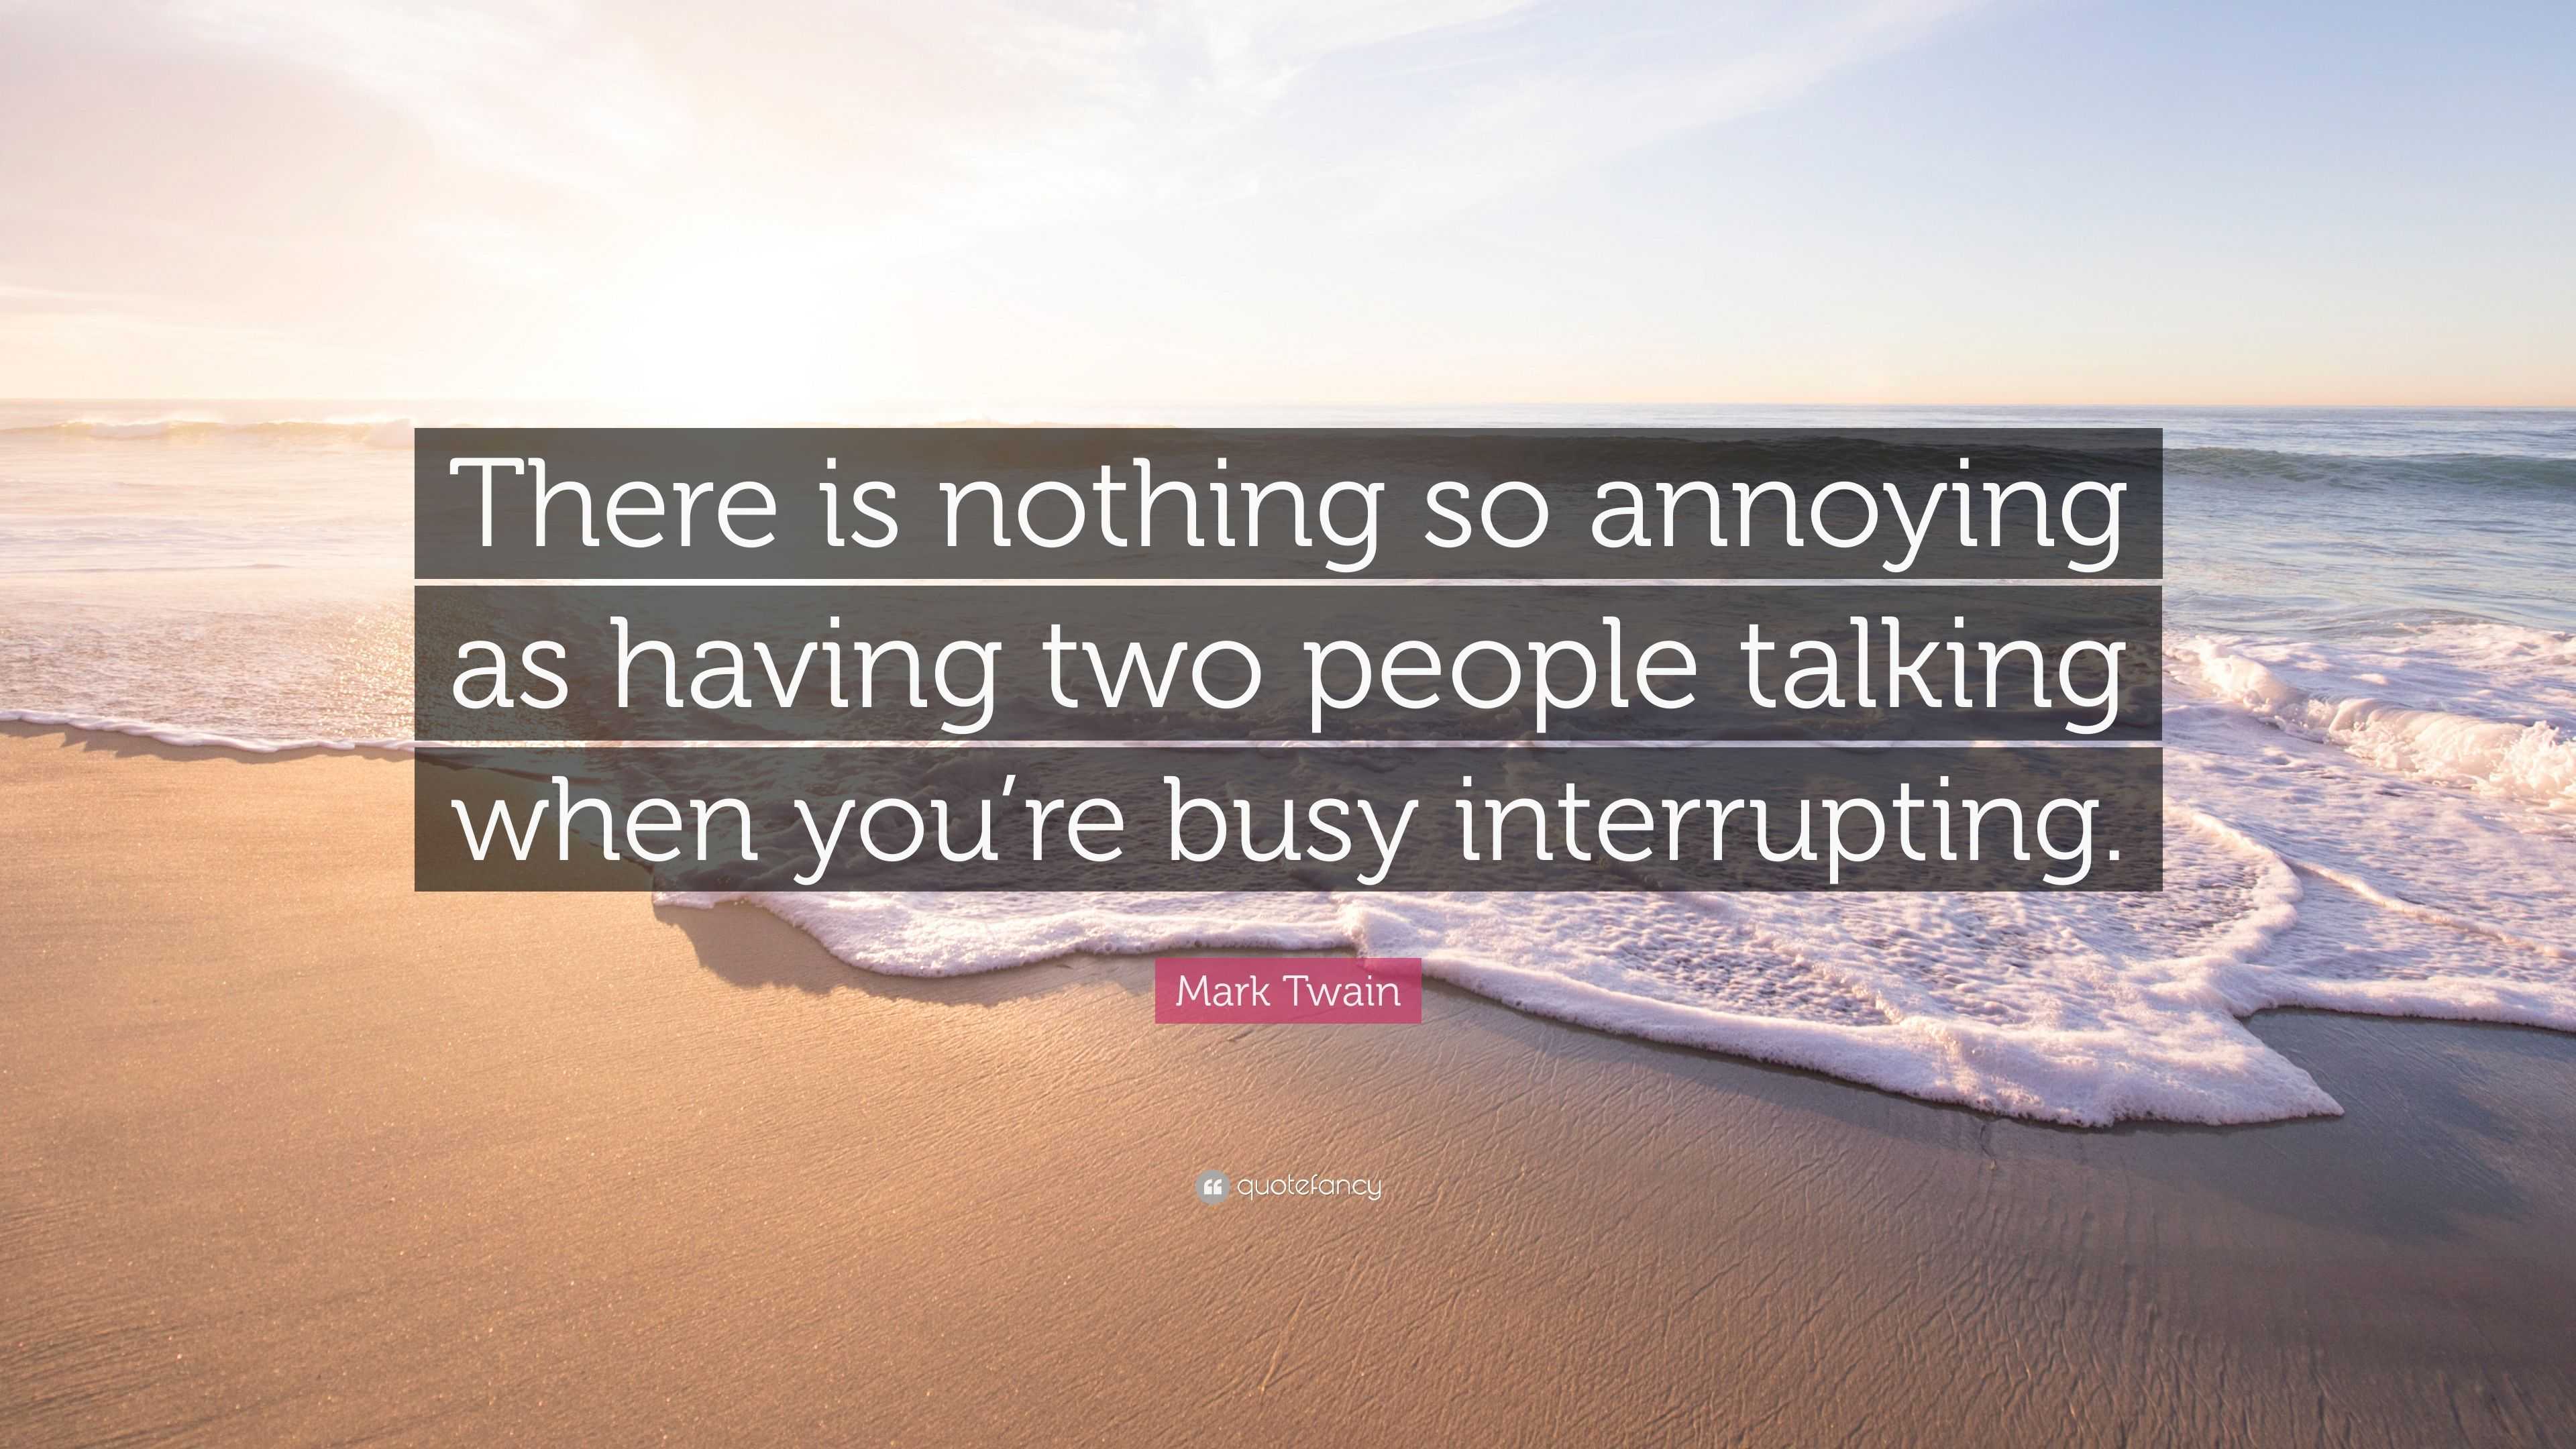 Mark Twain Quote: “There is nothing so annoying as having two people ...